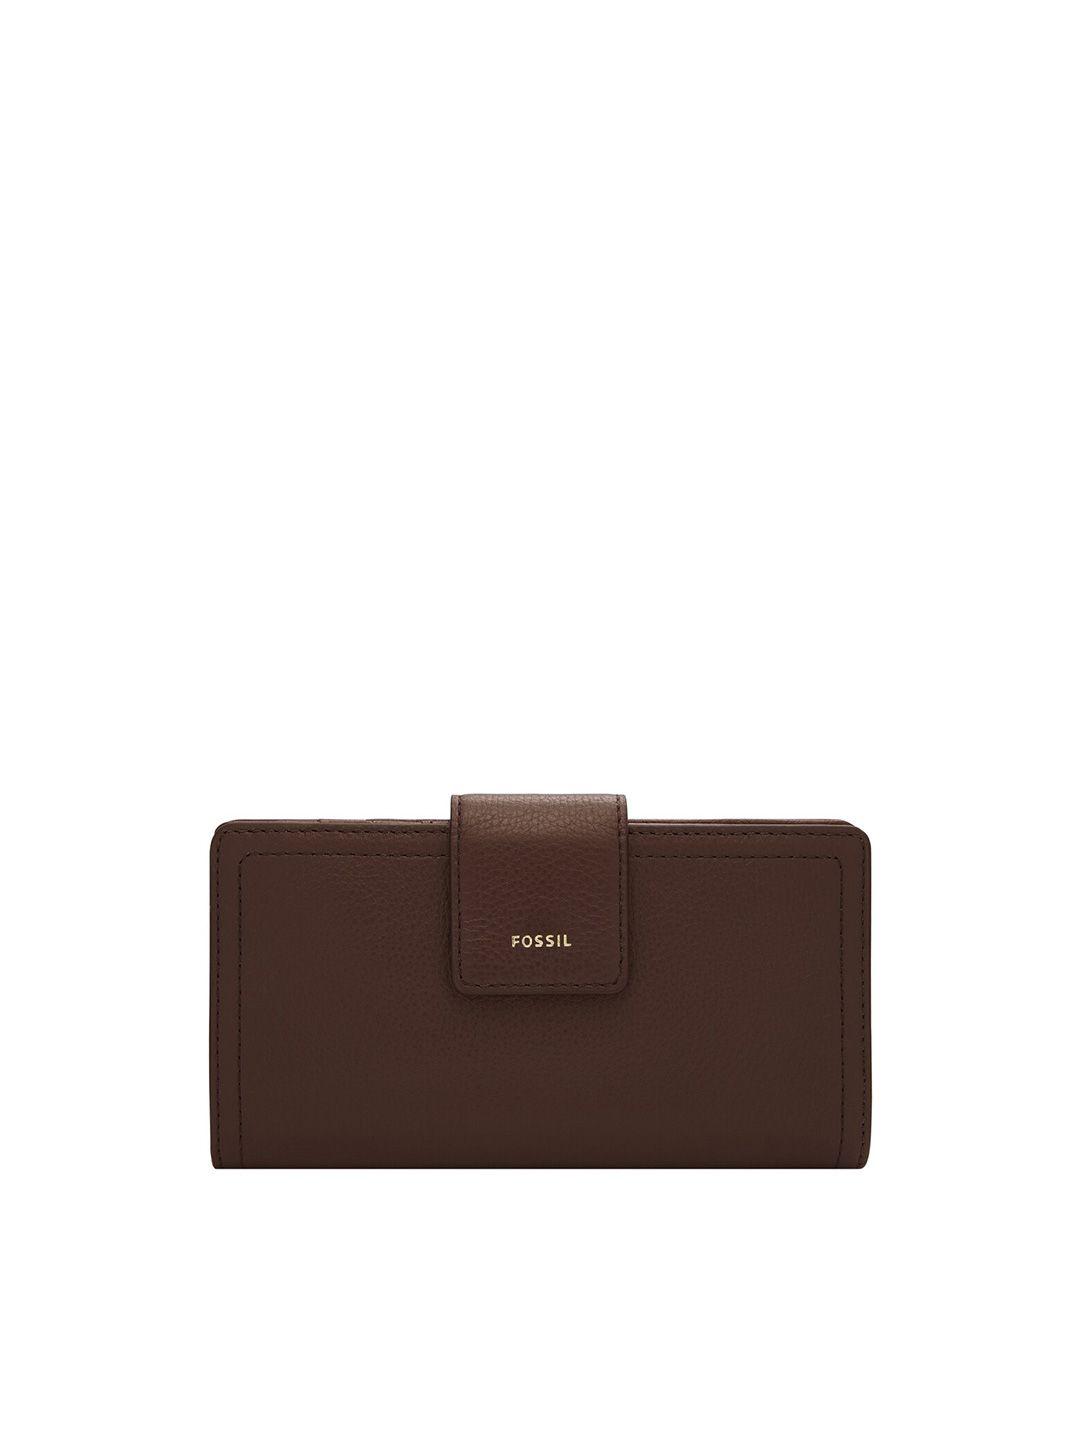 fossil leather envelope clutch